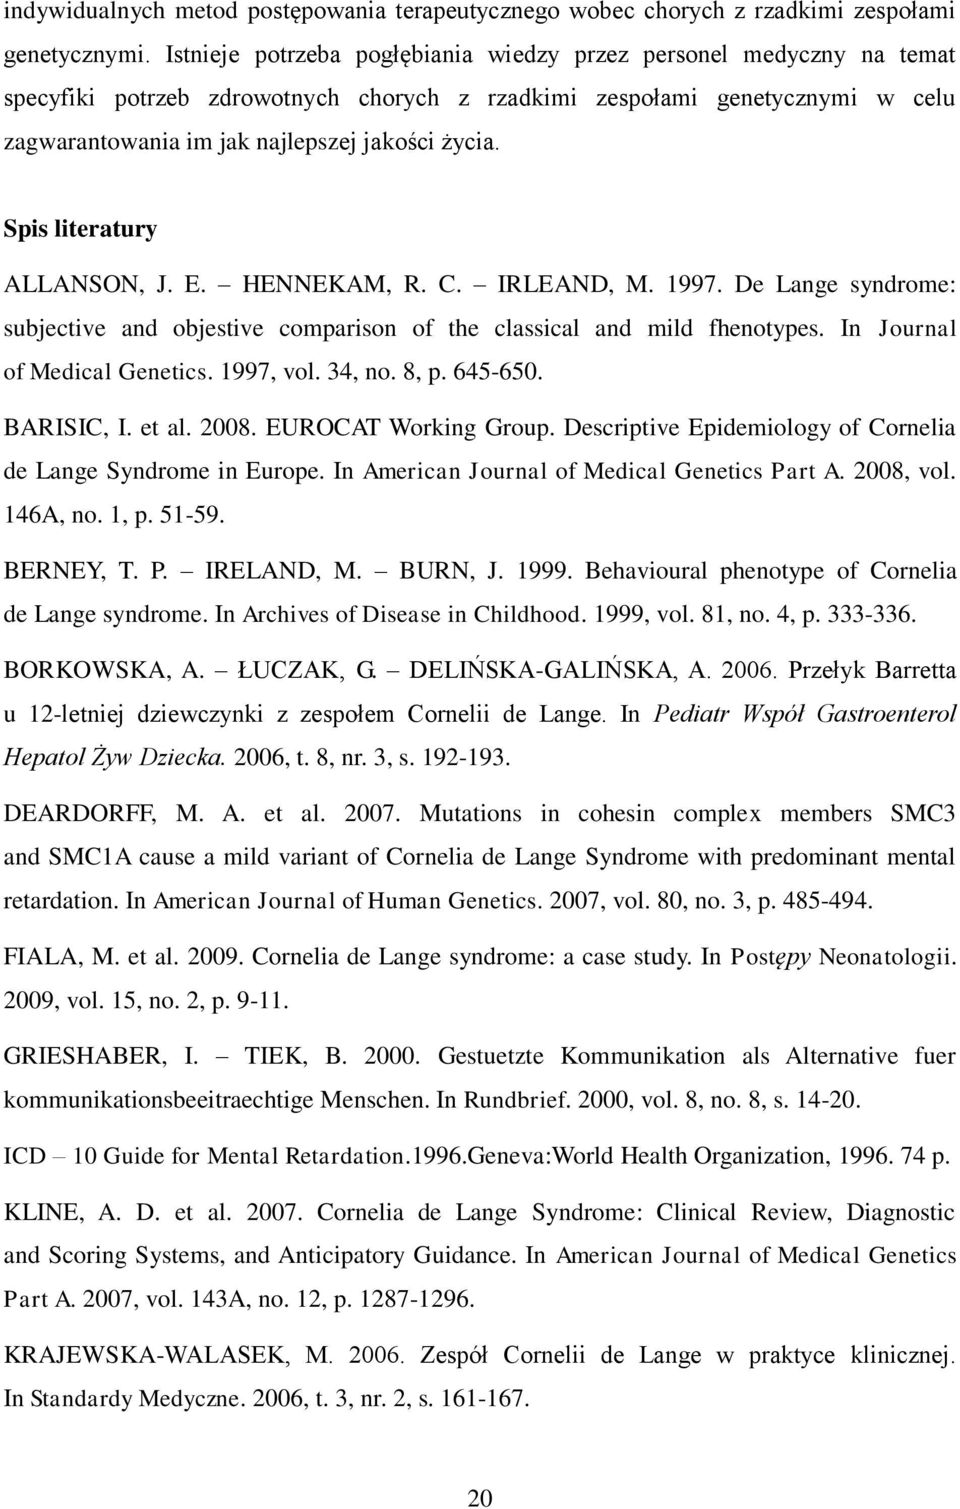 Spis literatury ALLANSON, J. E. HENNEKAM, R. C. IRLEAND, M. 1997. De Lange syndrome: subjective and objestive comparison of the classical and mild fhenotypes. In Journal of Medical Genetics.